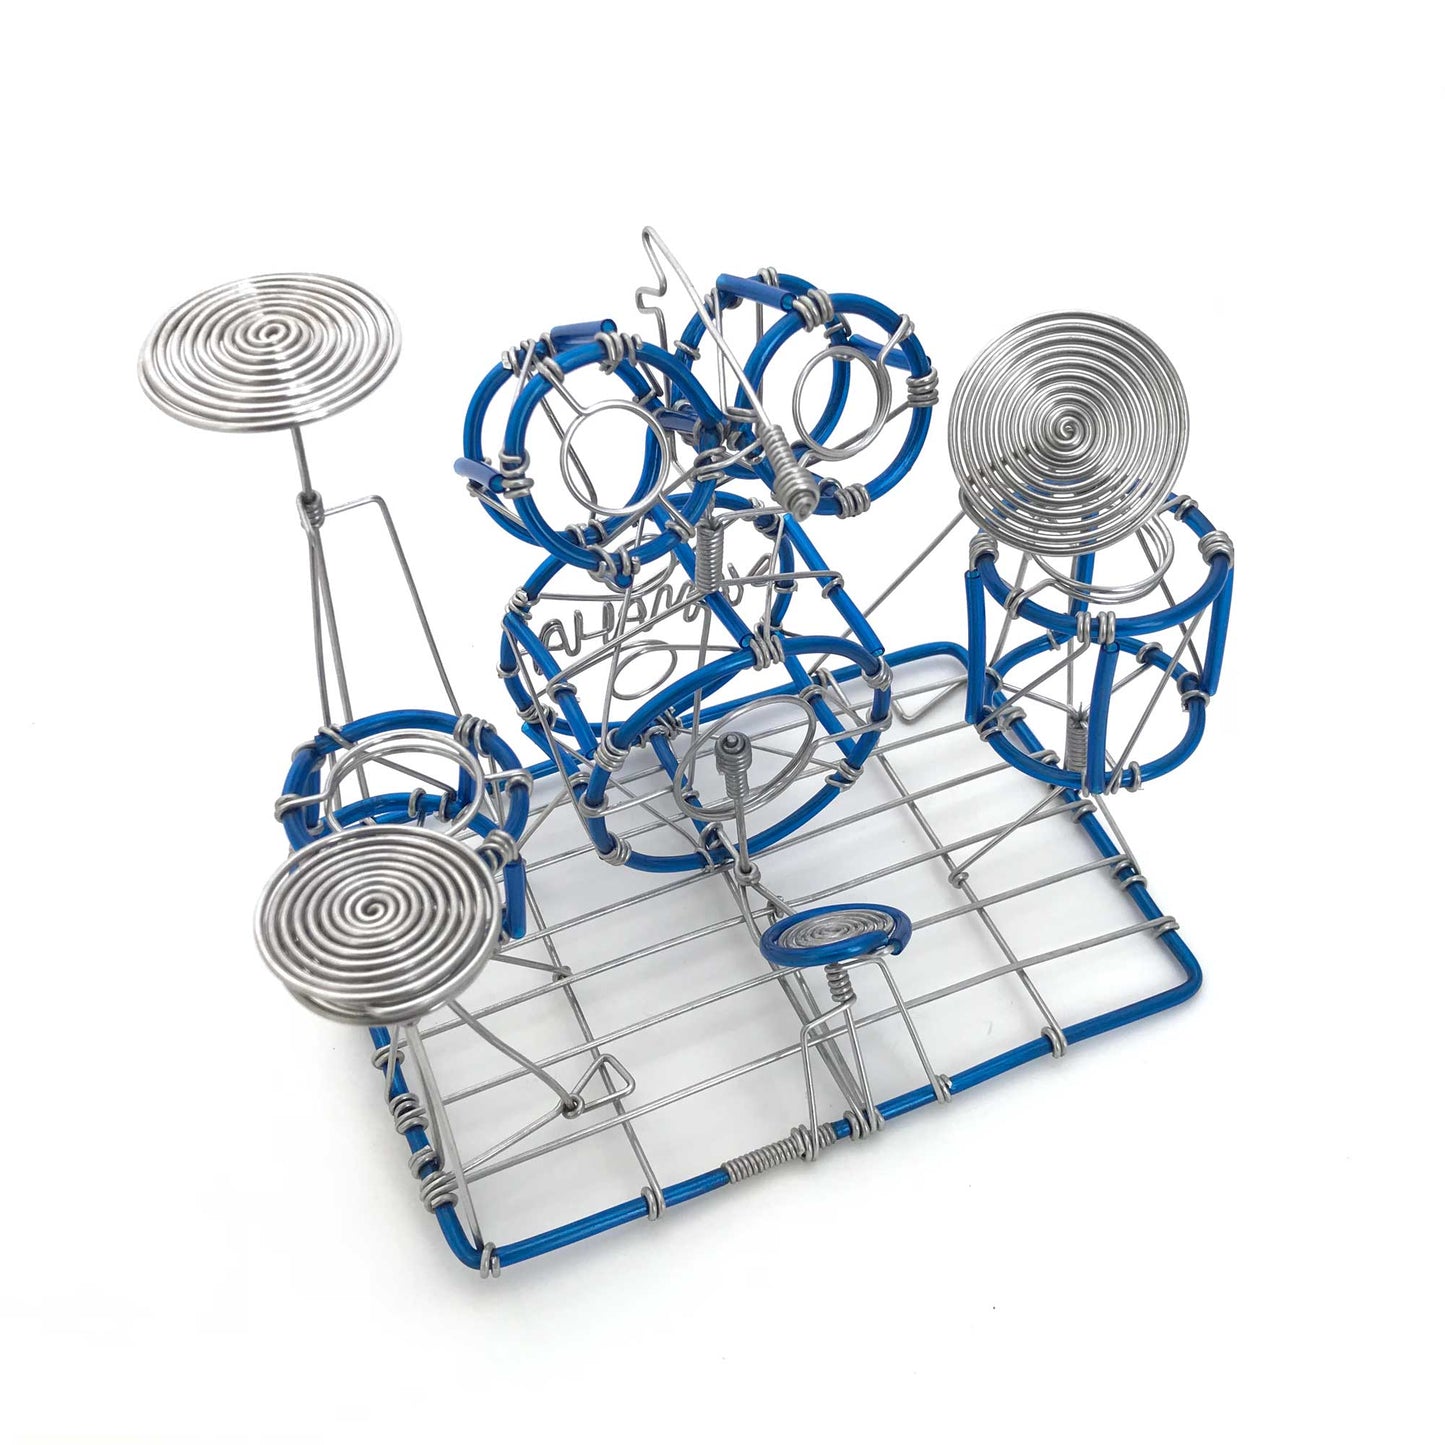 Miniature Wire Art Drumset hand-crafted from aluminium wire